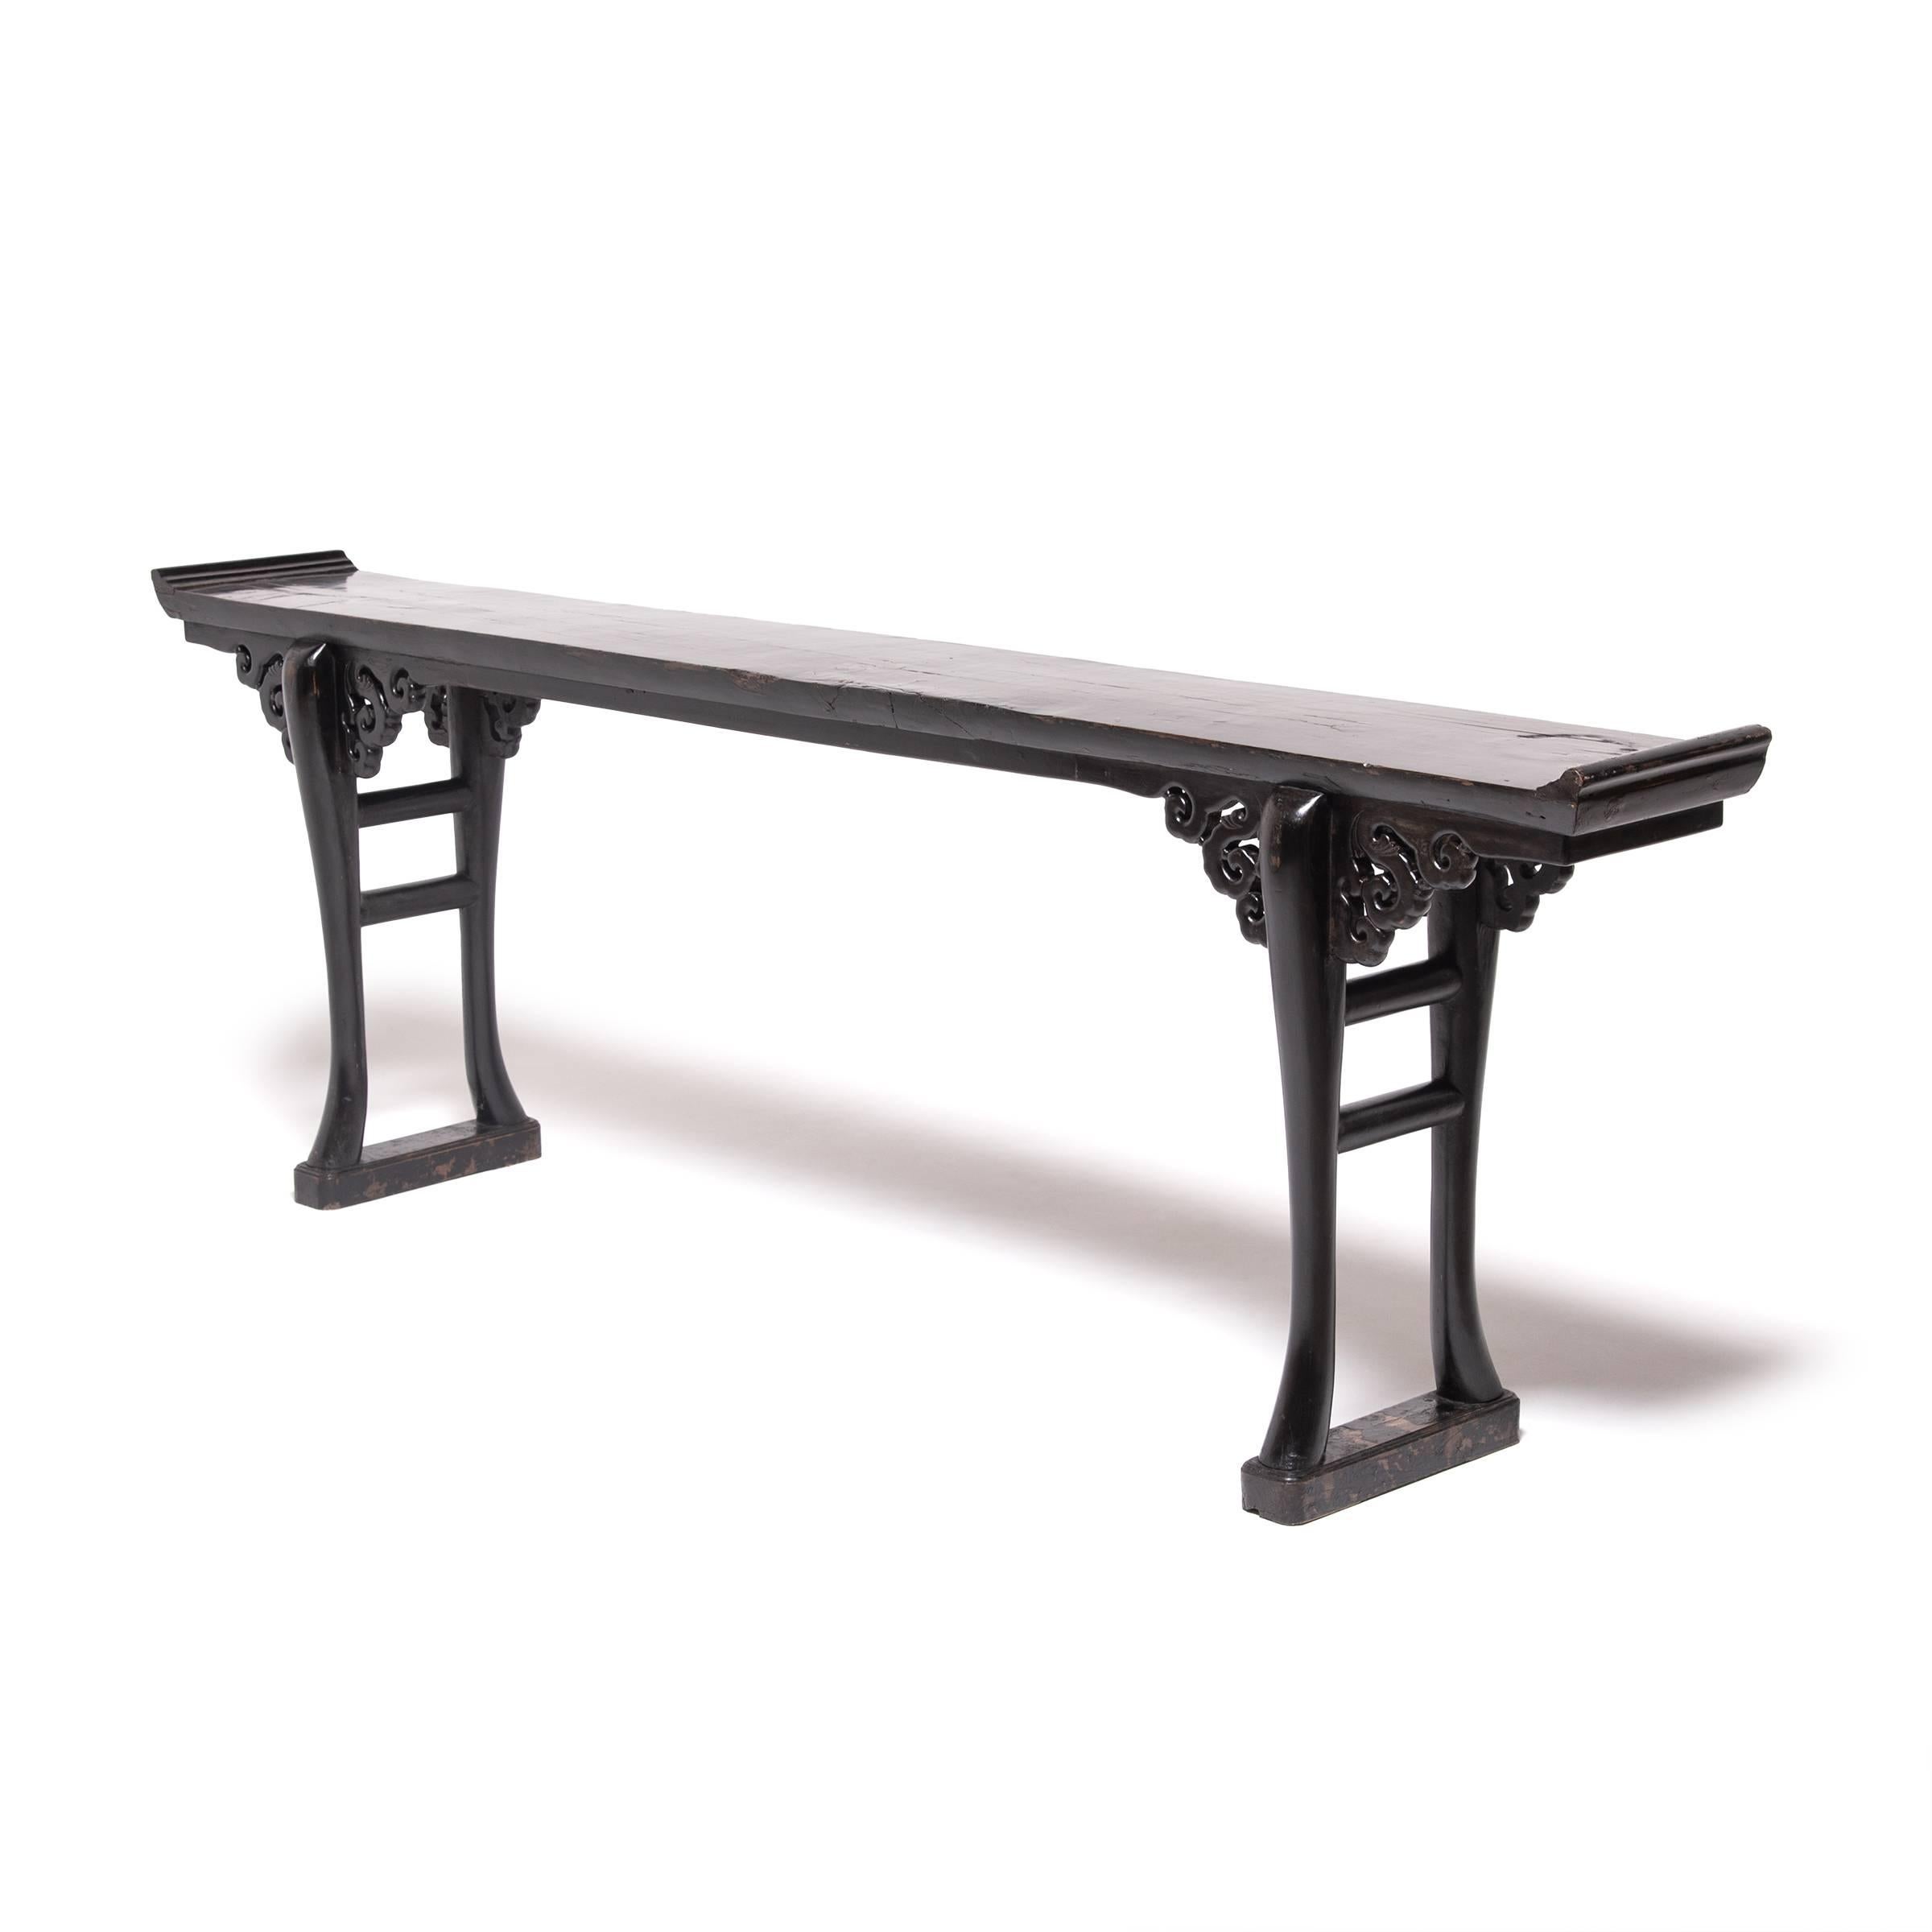 Gathered from the forests of northern China, elmwood provided the raw material with which highly skilled artisans created this elegant altar table. Eight dragons, symbolizing strength, and intricate cloud-like scrollwork skillfully carved on the